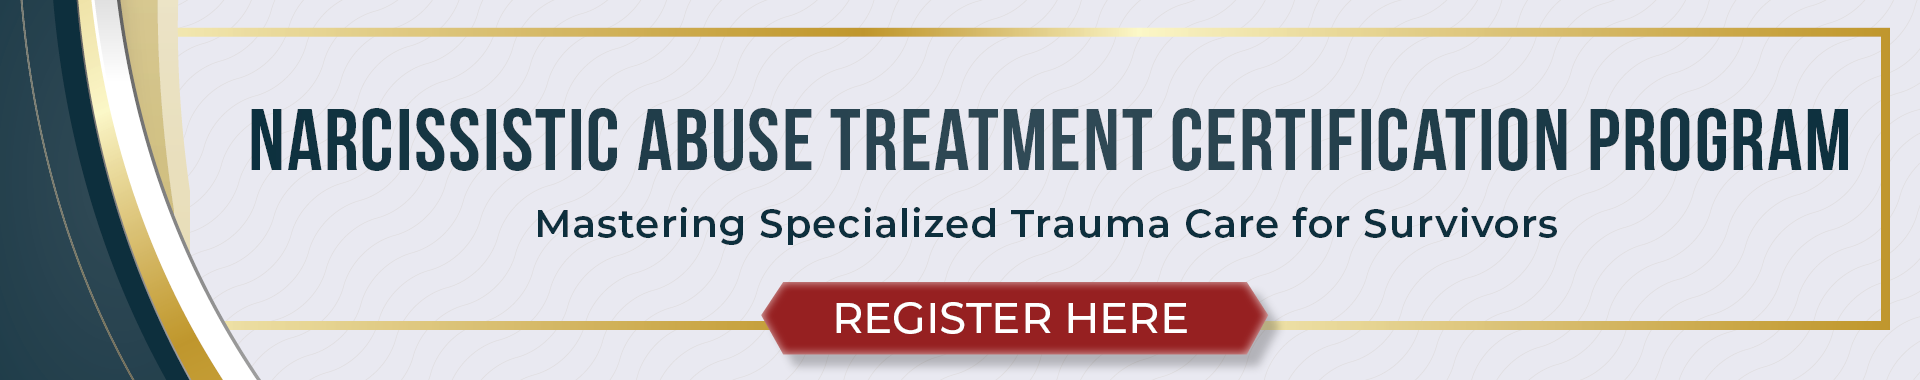 Narcissistic Abuse Treatment Certification Program: Mastering Specialized Trauma Care for Survivors